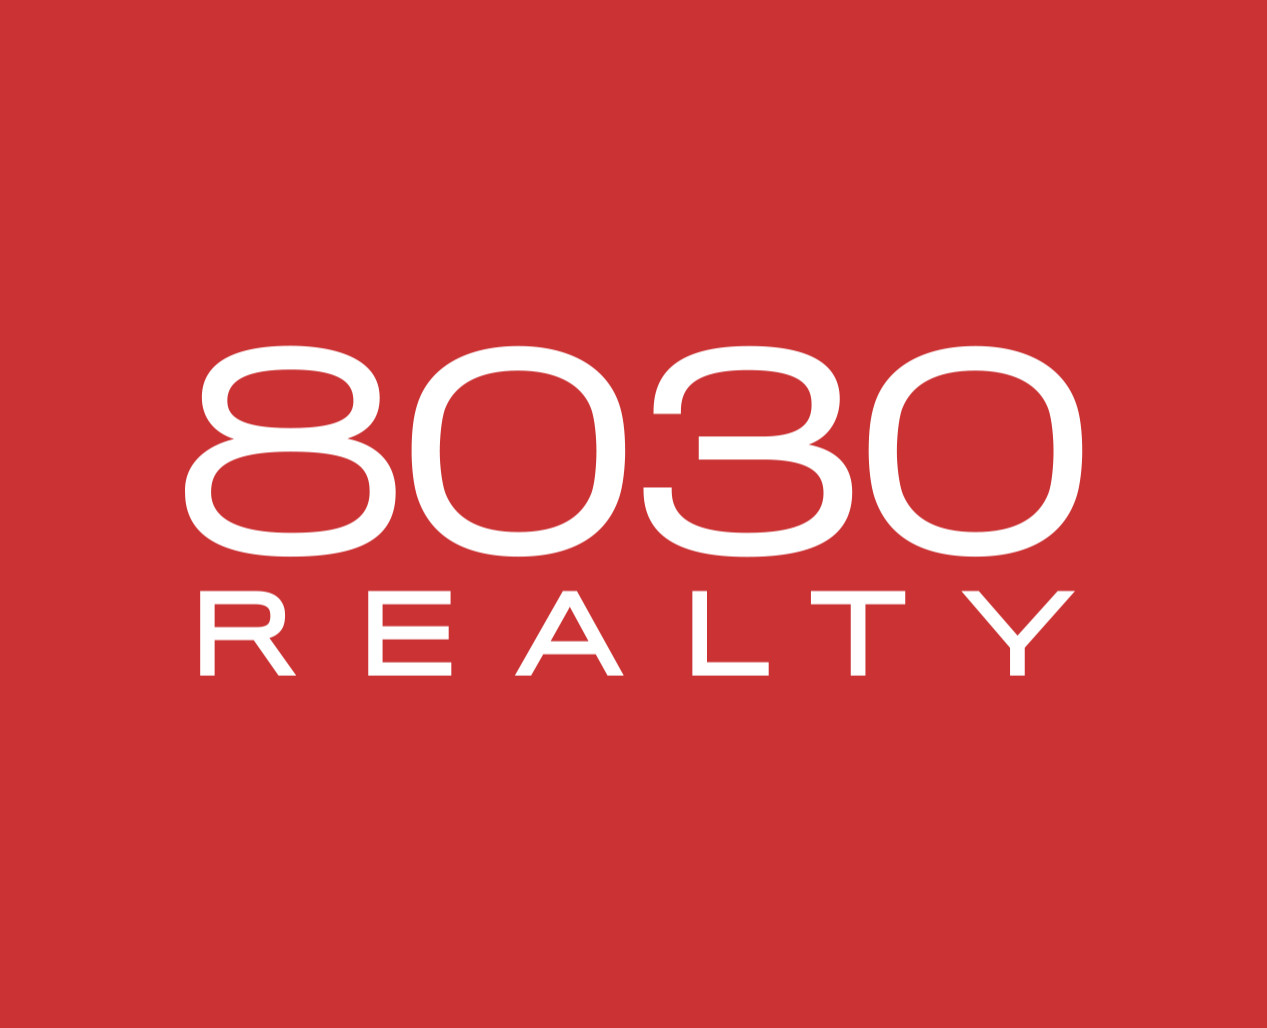 8030 Realty